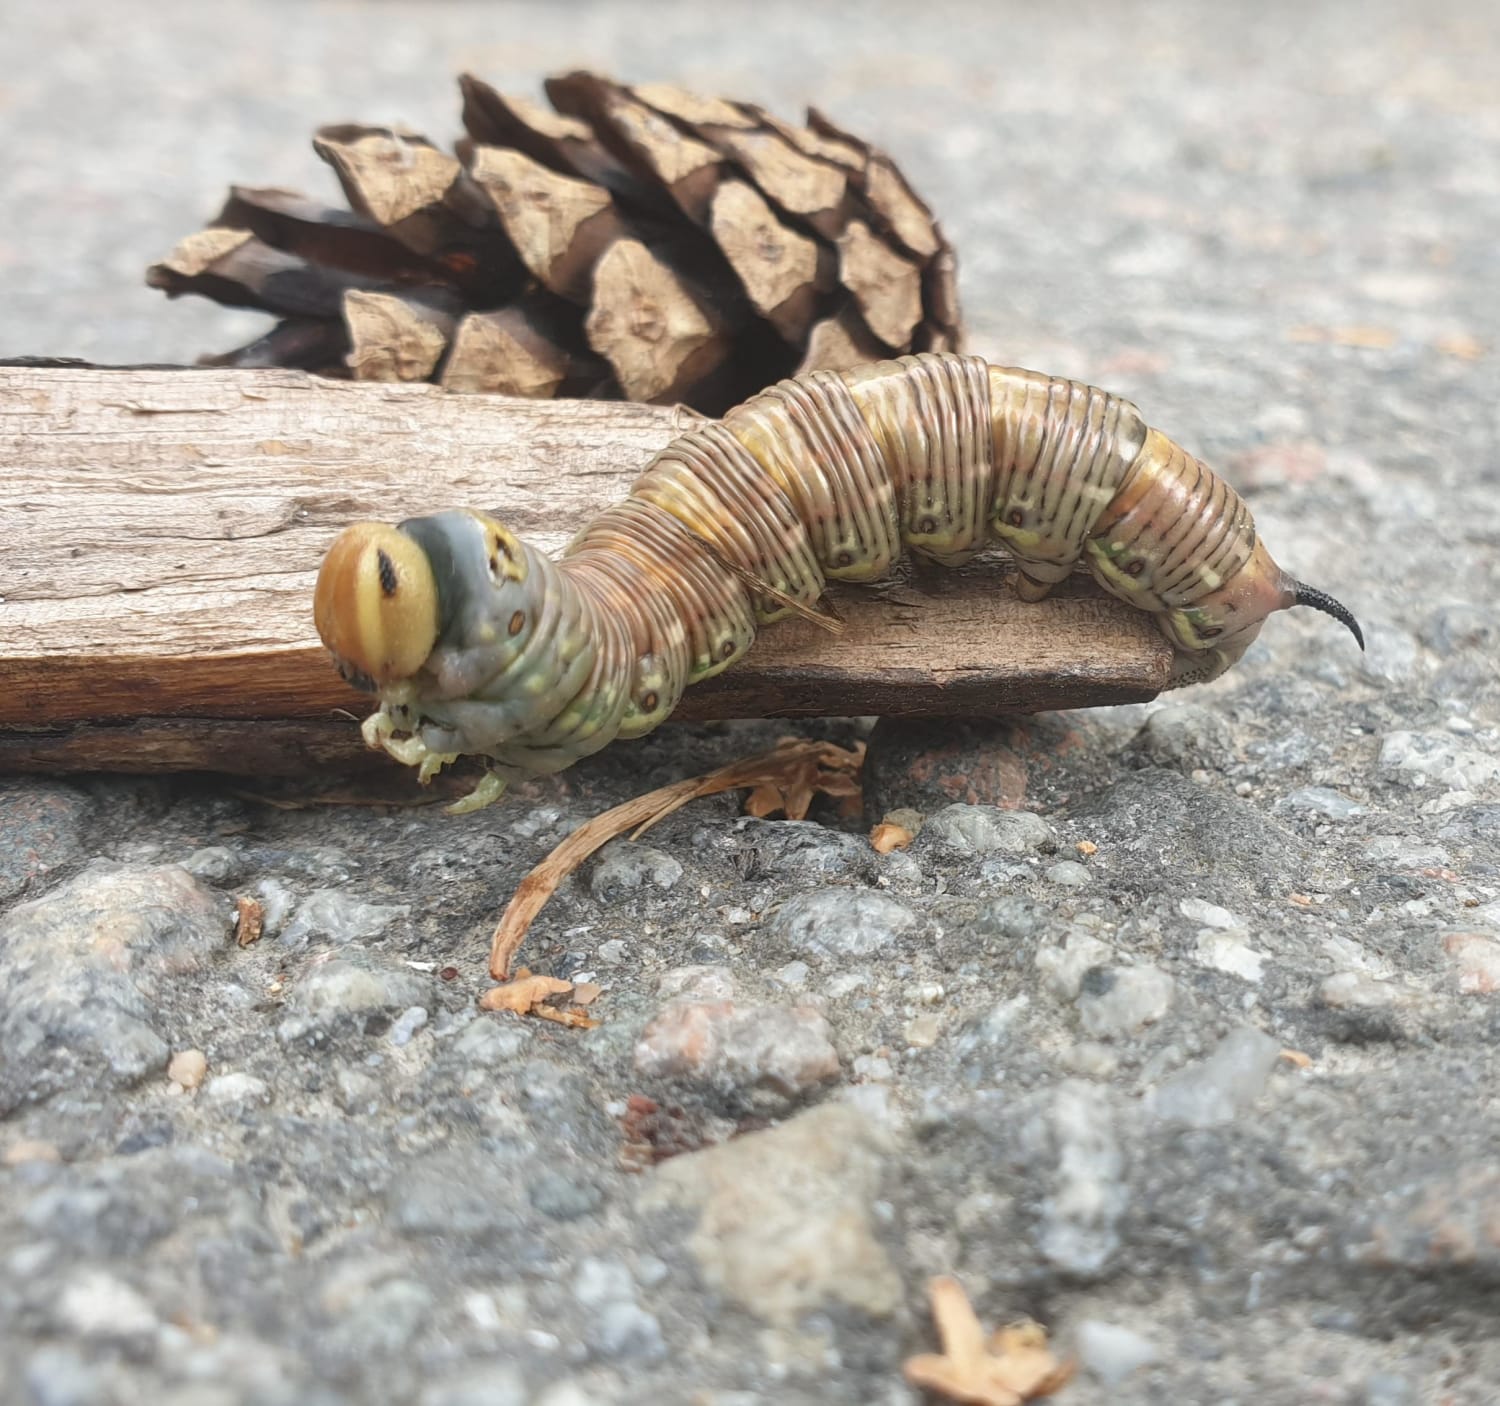 What's this caterpillar? Stockholm, Sweden. About 5 cm.